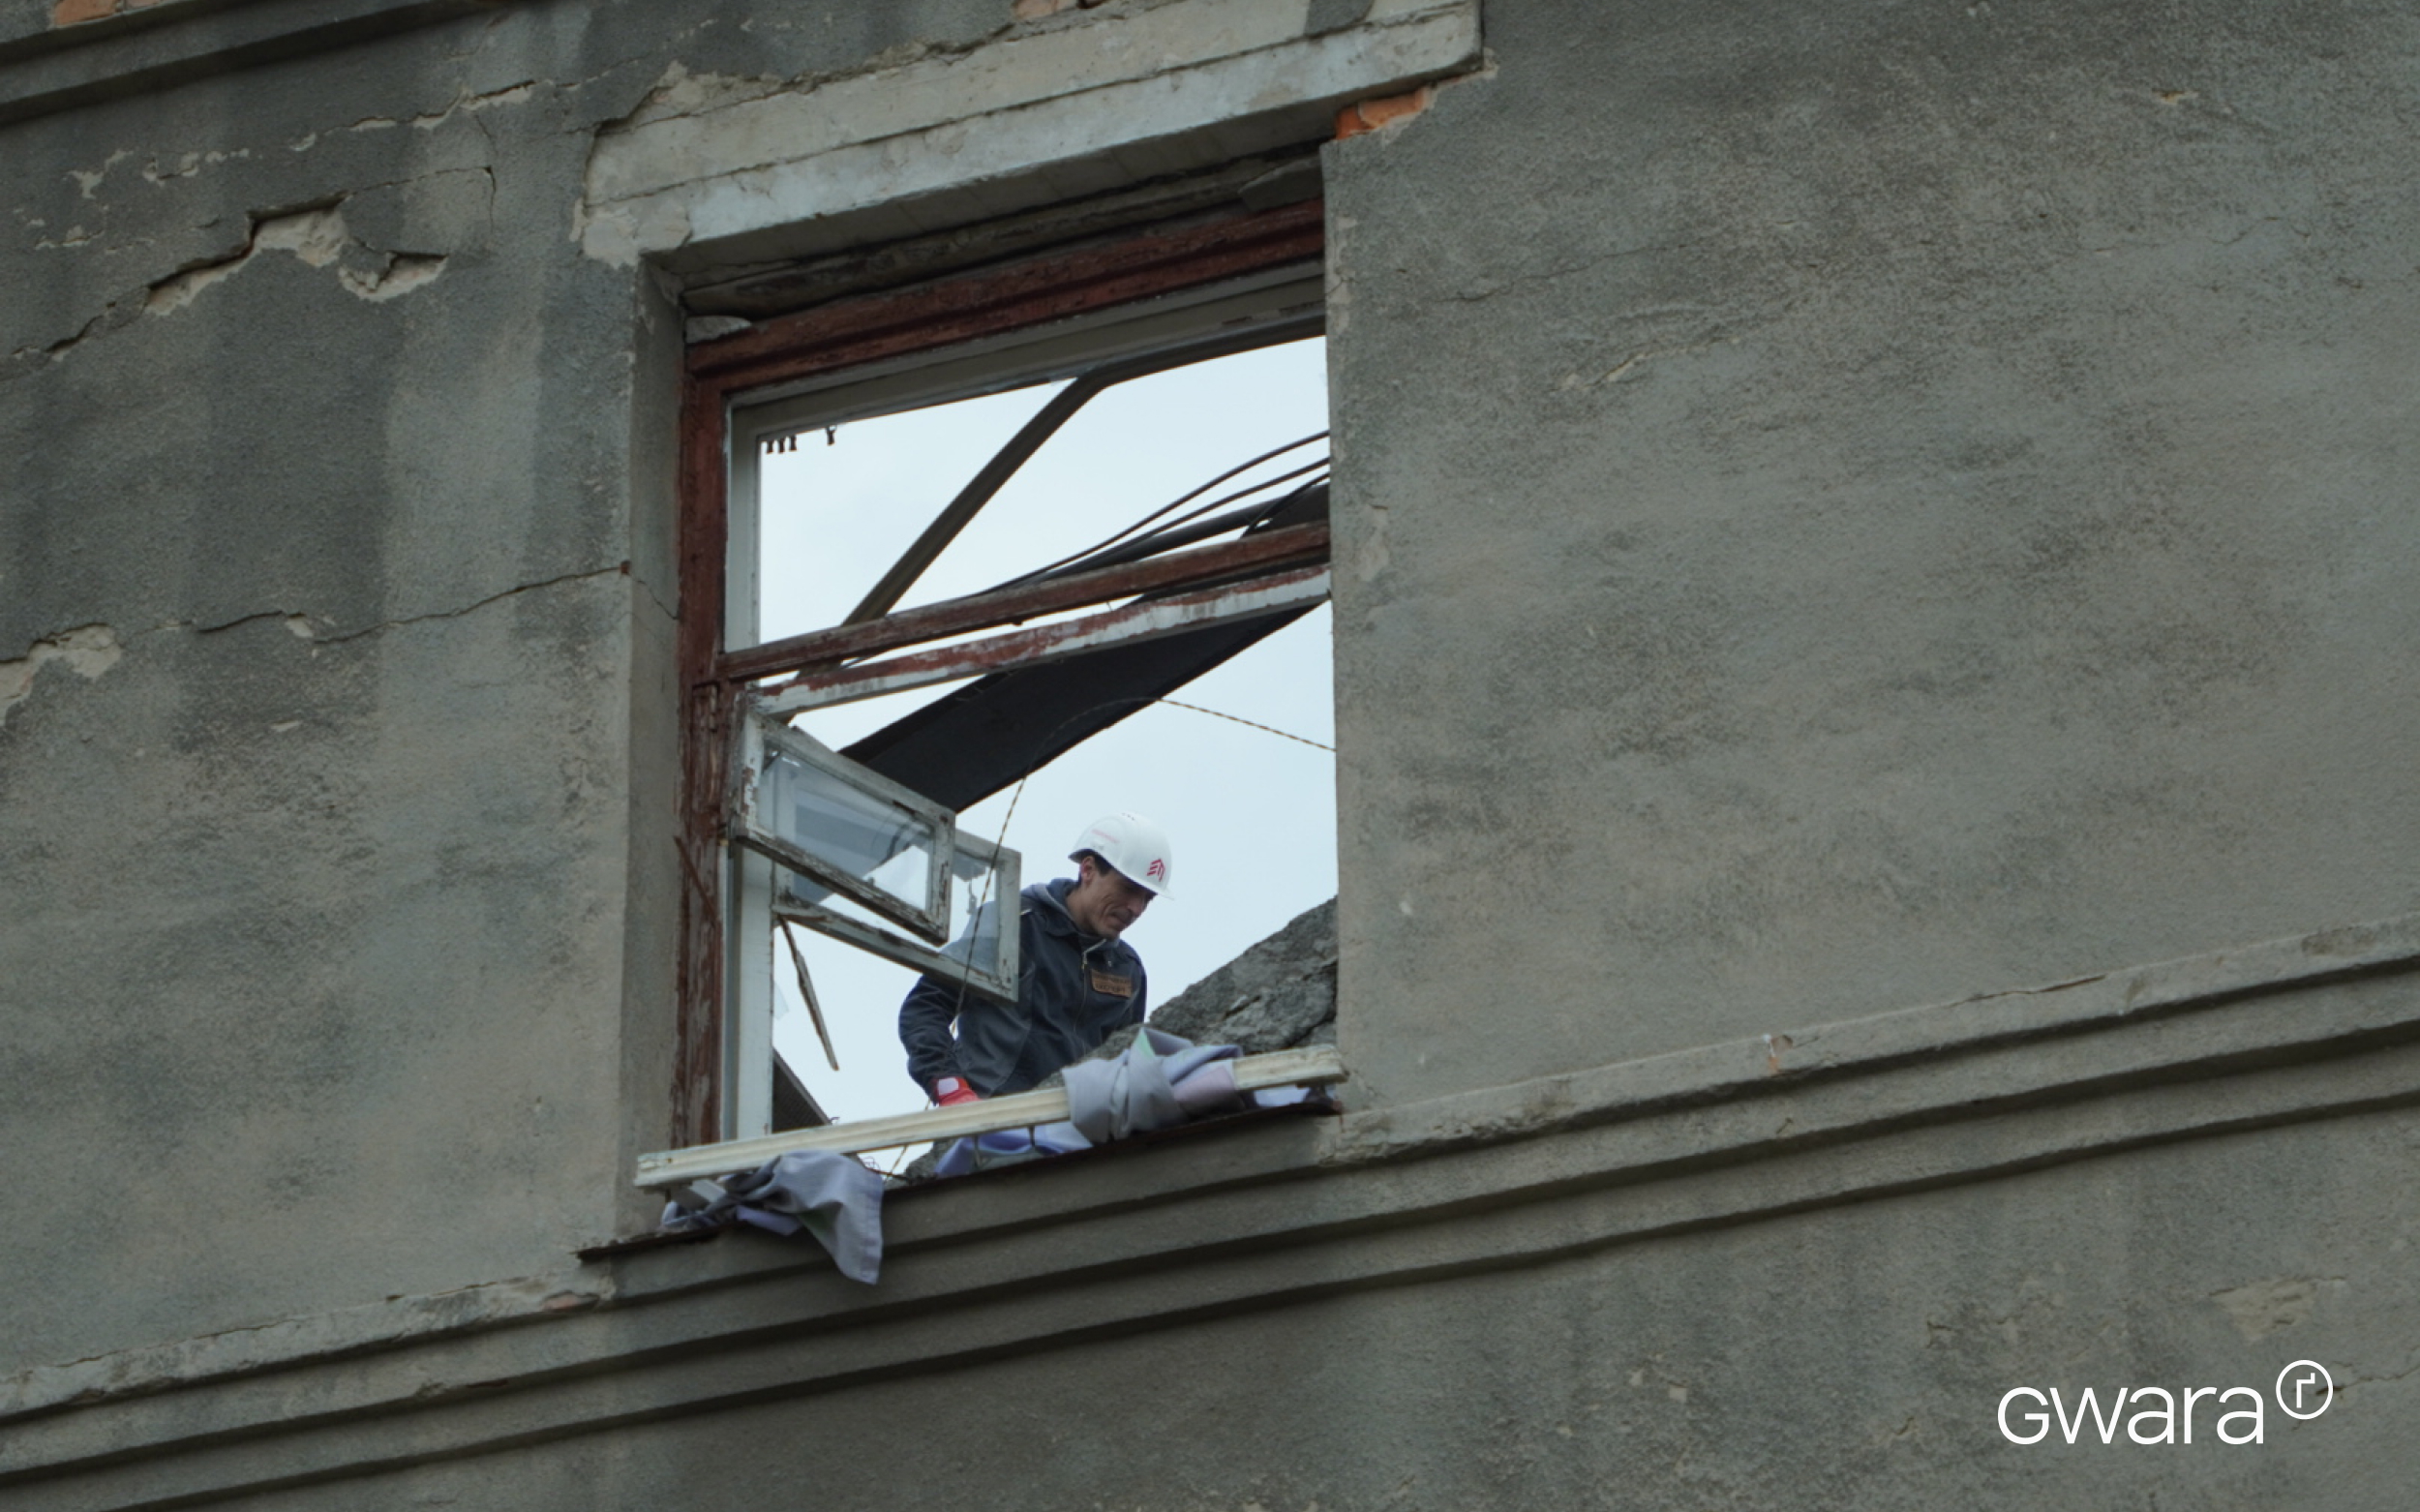 City workers clean up the debris in the aftermath of Russian drone attack on Kharkiv / Photo: Ivan Samoilov for Gwara Media